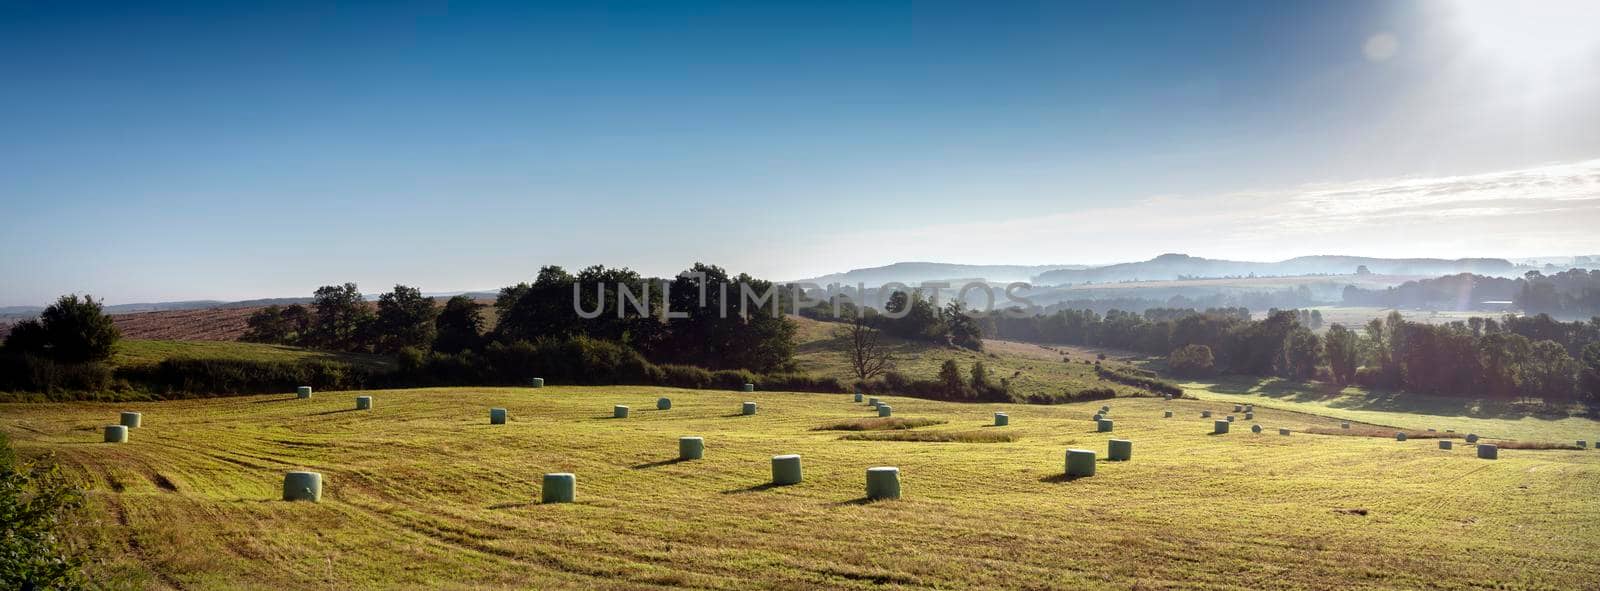 foggy early morning landscape with hay bales under blue sky in french ardennes near charleville in northern france